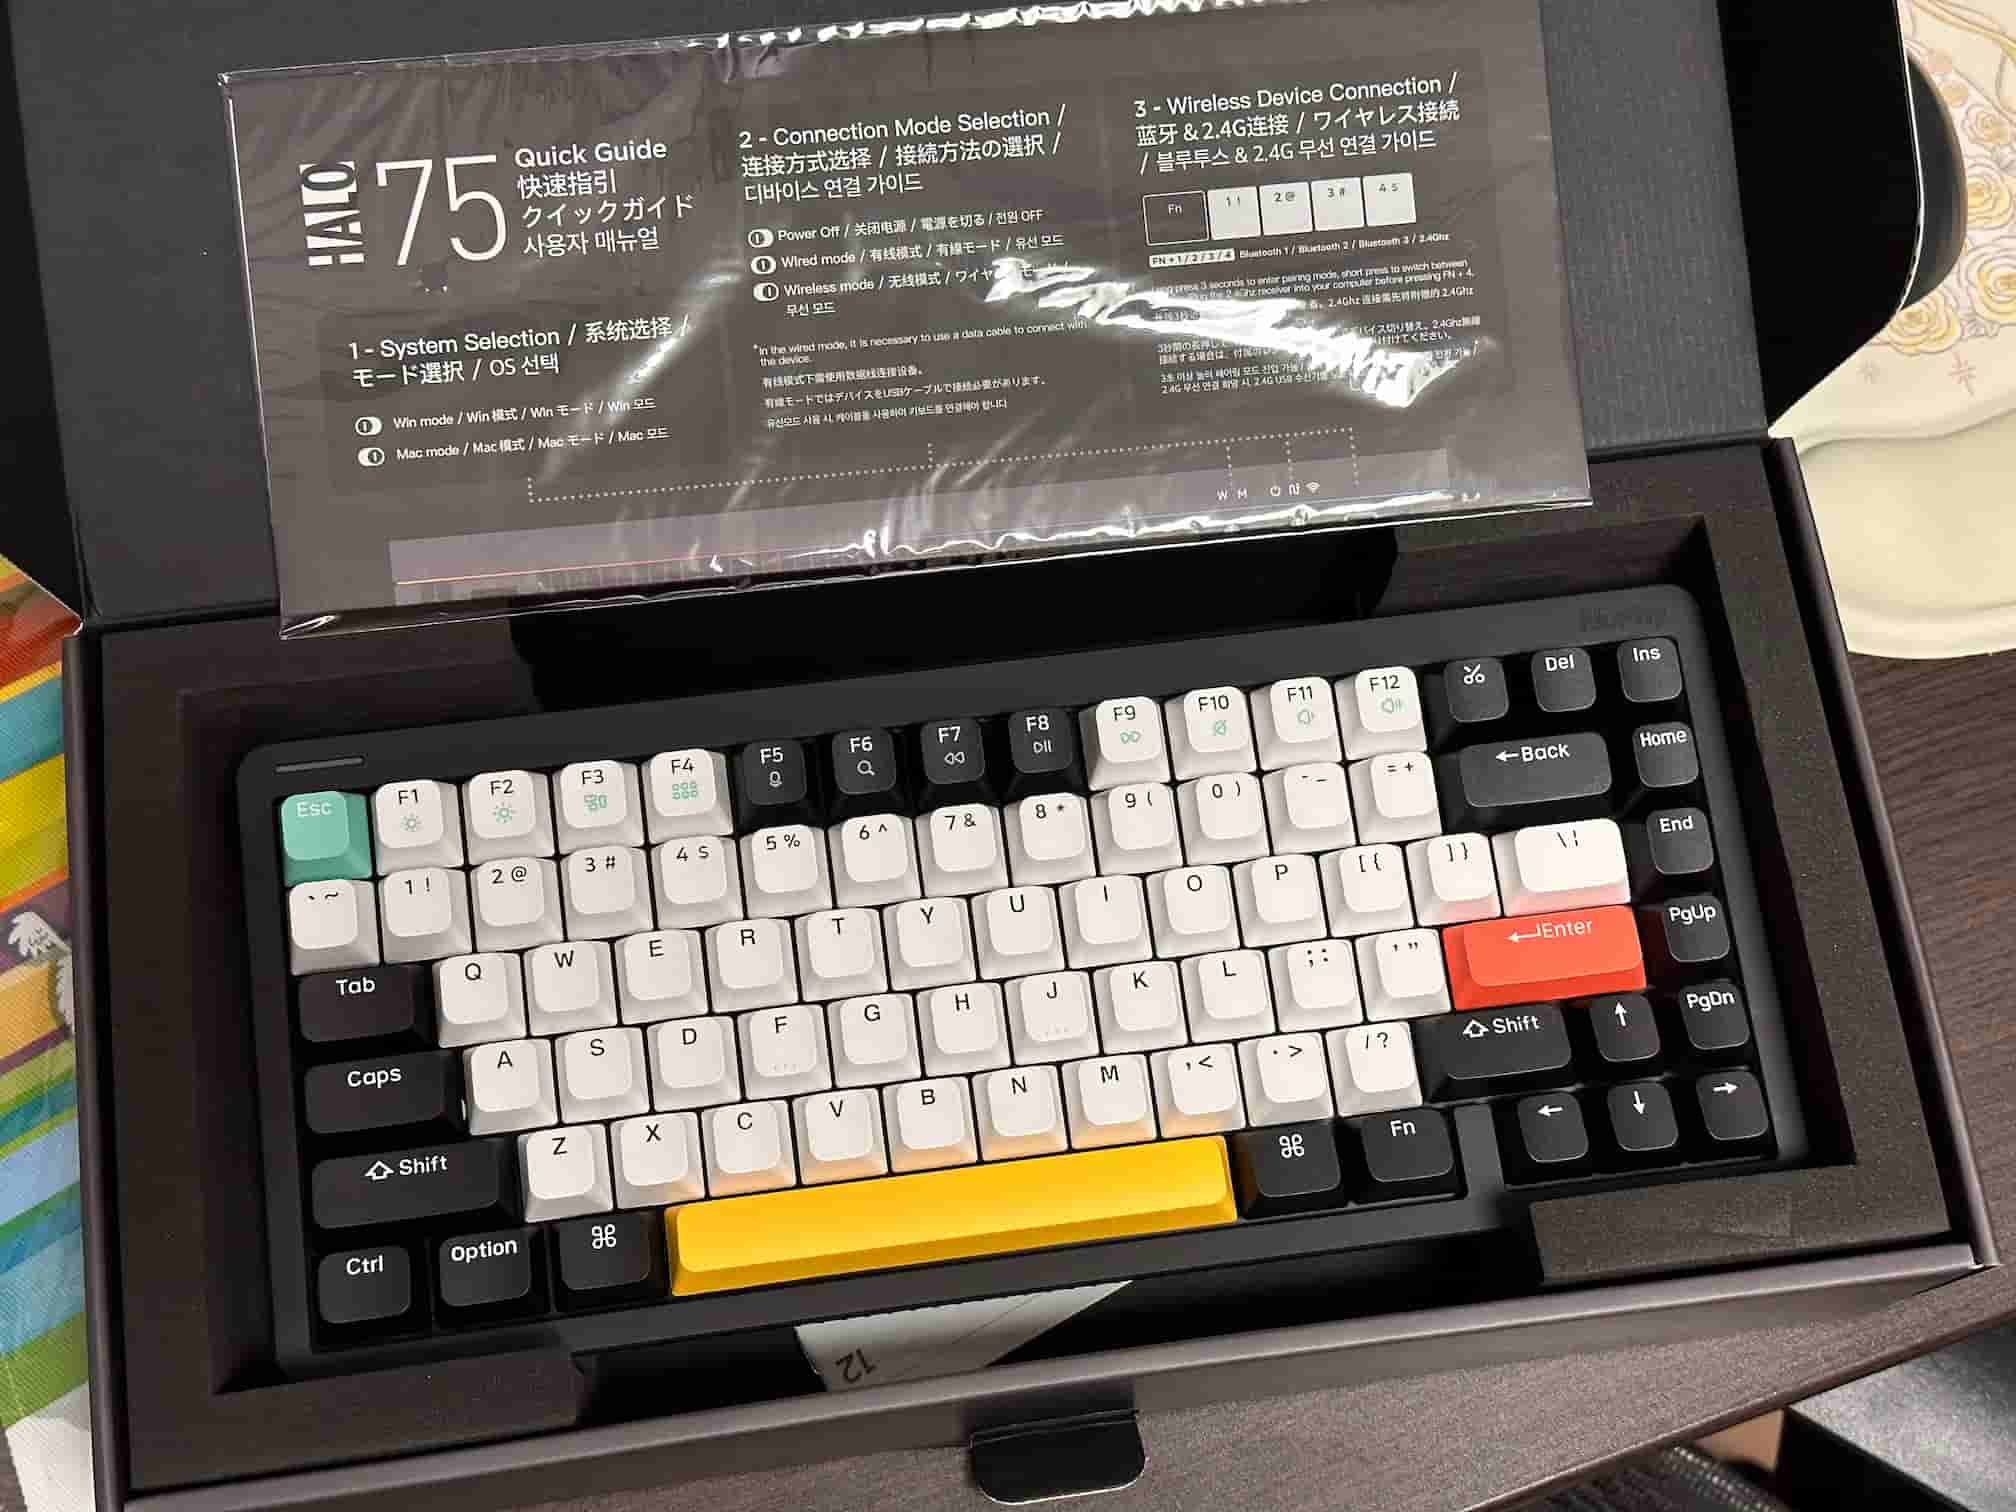 The NuPhy Halo75 mechanical keyboard is showcased inside its box, with the Quick Guide visible on the left. The keyboard features a colorful layout with white, gray, and black keycaps, accented with a blue Esc key, yellow space bar, and red Enter key